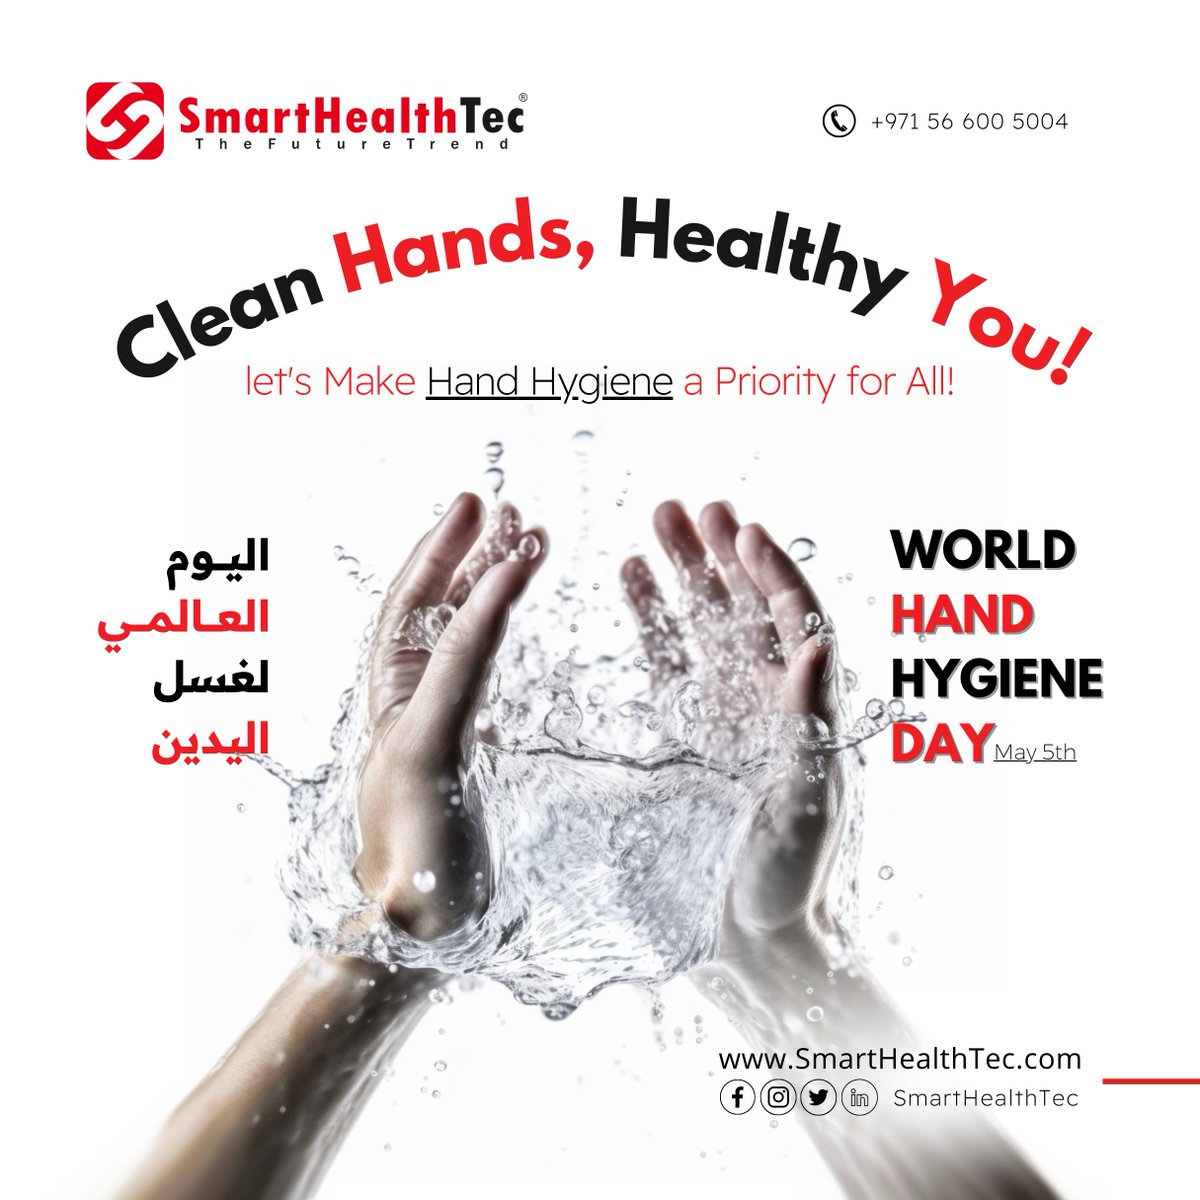 Remember to wash your hands regularly with soap and water or use hand sanitizer when soap and water are not available.

#WorldHandHygieneDay #CleanHandsSaveLives #HandHygiene #HandWashing #HandSanitizing #InfectionPrevention #HealthAndHygiene #StopTheSpread #HealthyHabits